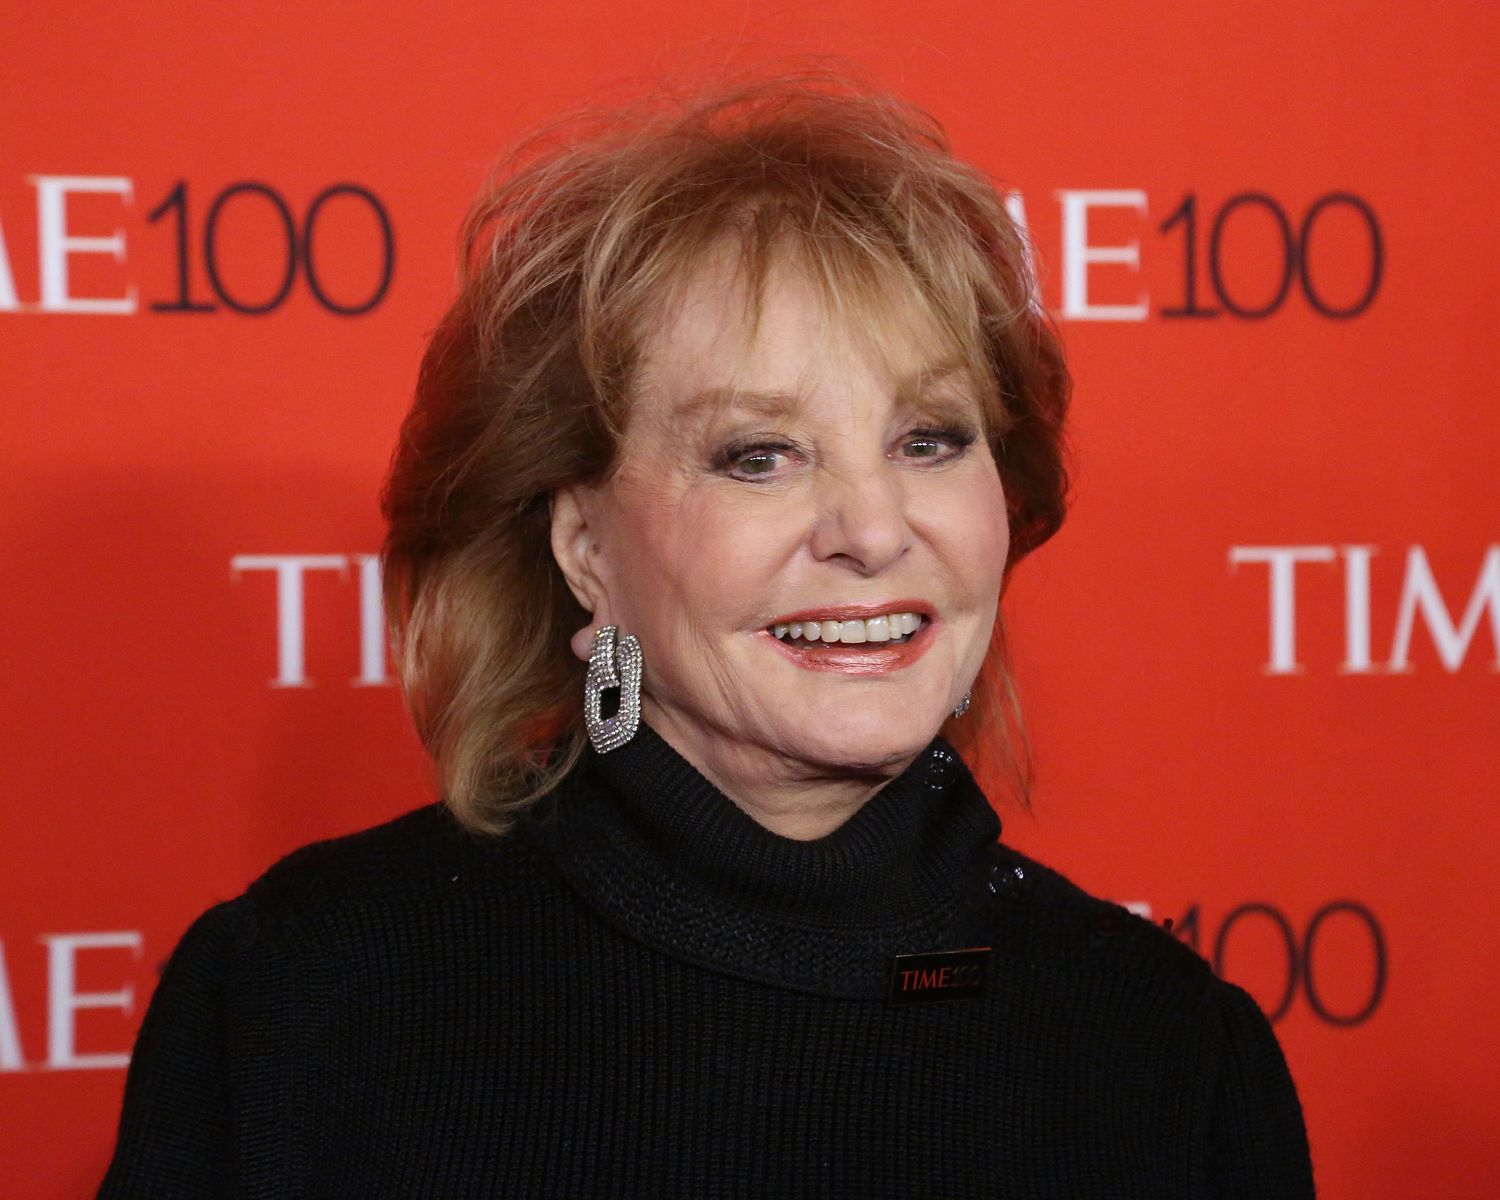 TV personality Barbara Walters at the 2015 Time 100 Gala at Frederick P. Rose Hall, Jazz at Lincoln Center on April 21, 2015 | Photo: Getty Images